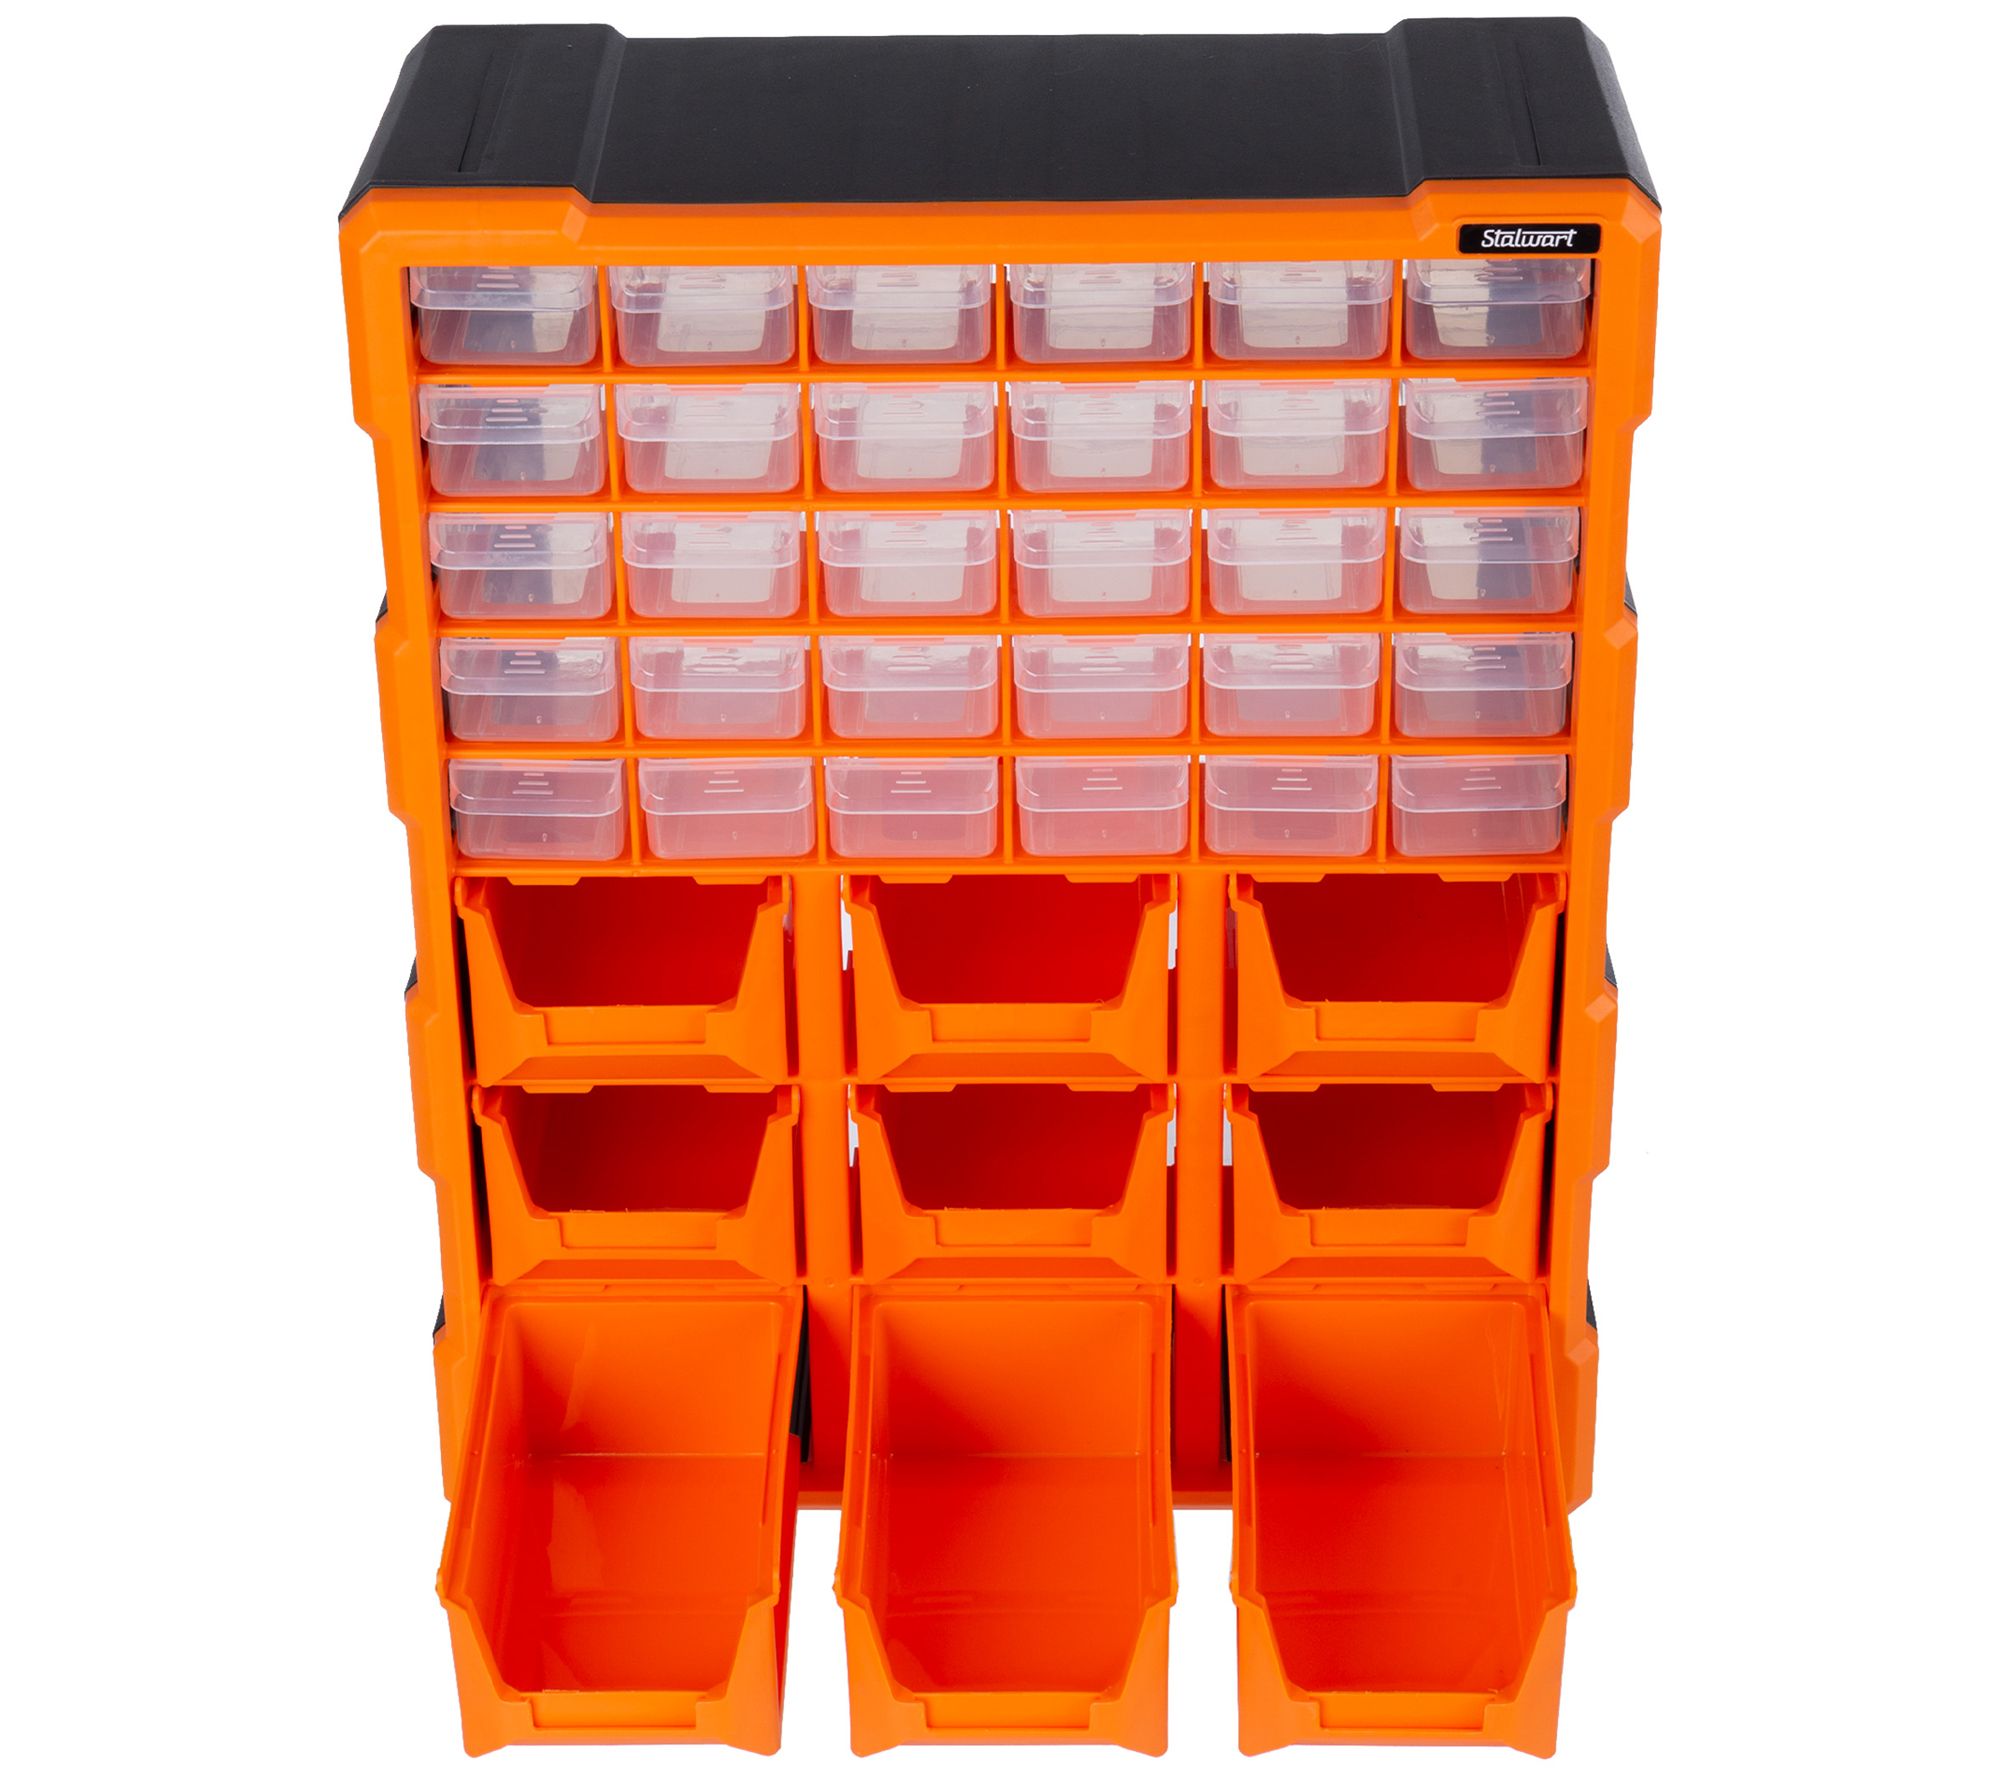 Stalwart Portable Tool Box - Small Parts Organizer and Customizable  Compartment for Hardware, Crafts & Reviews